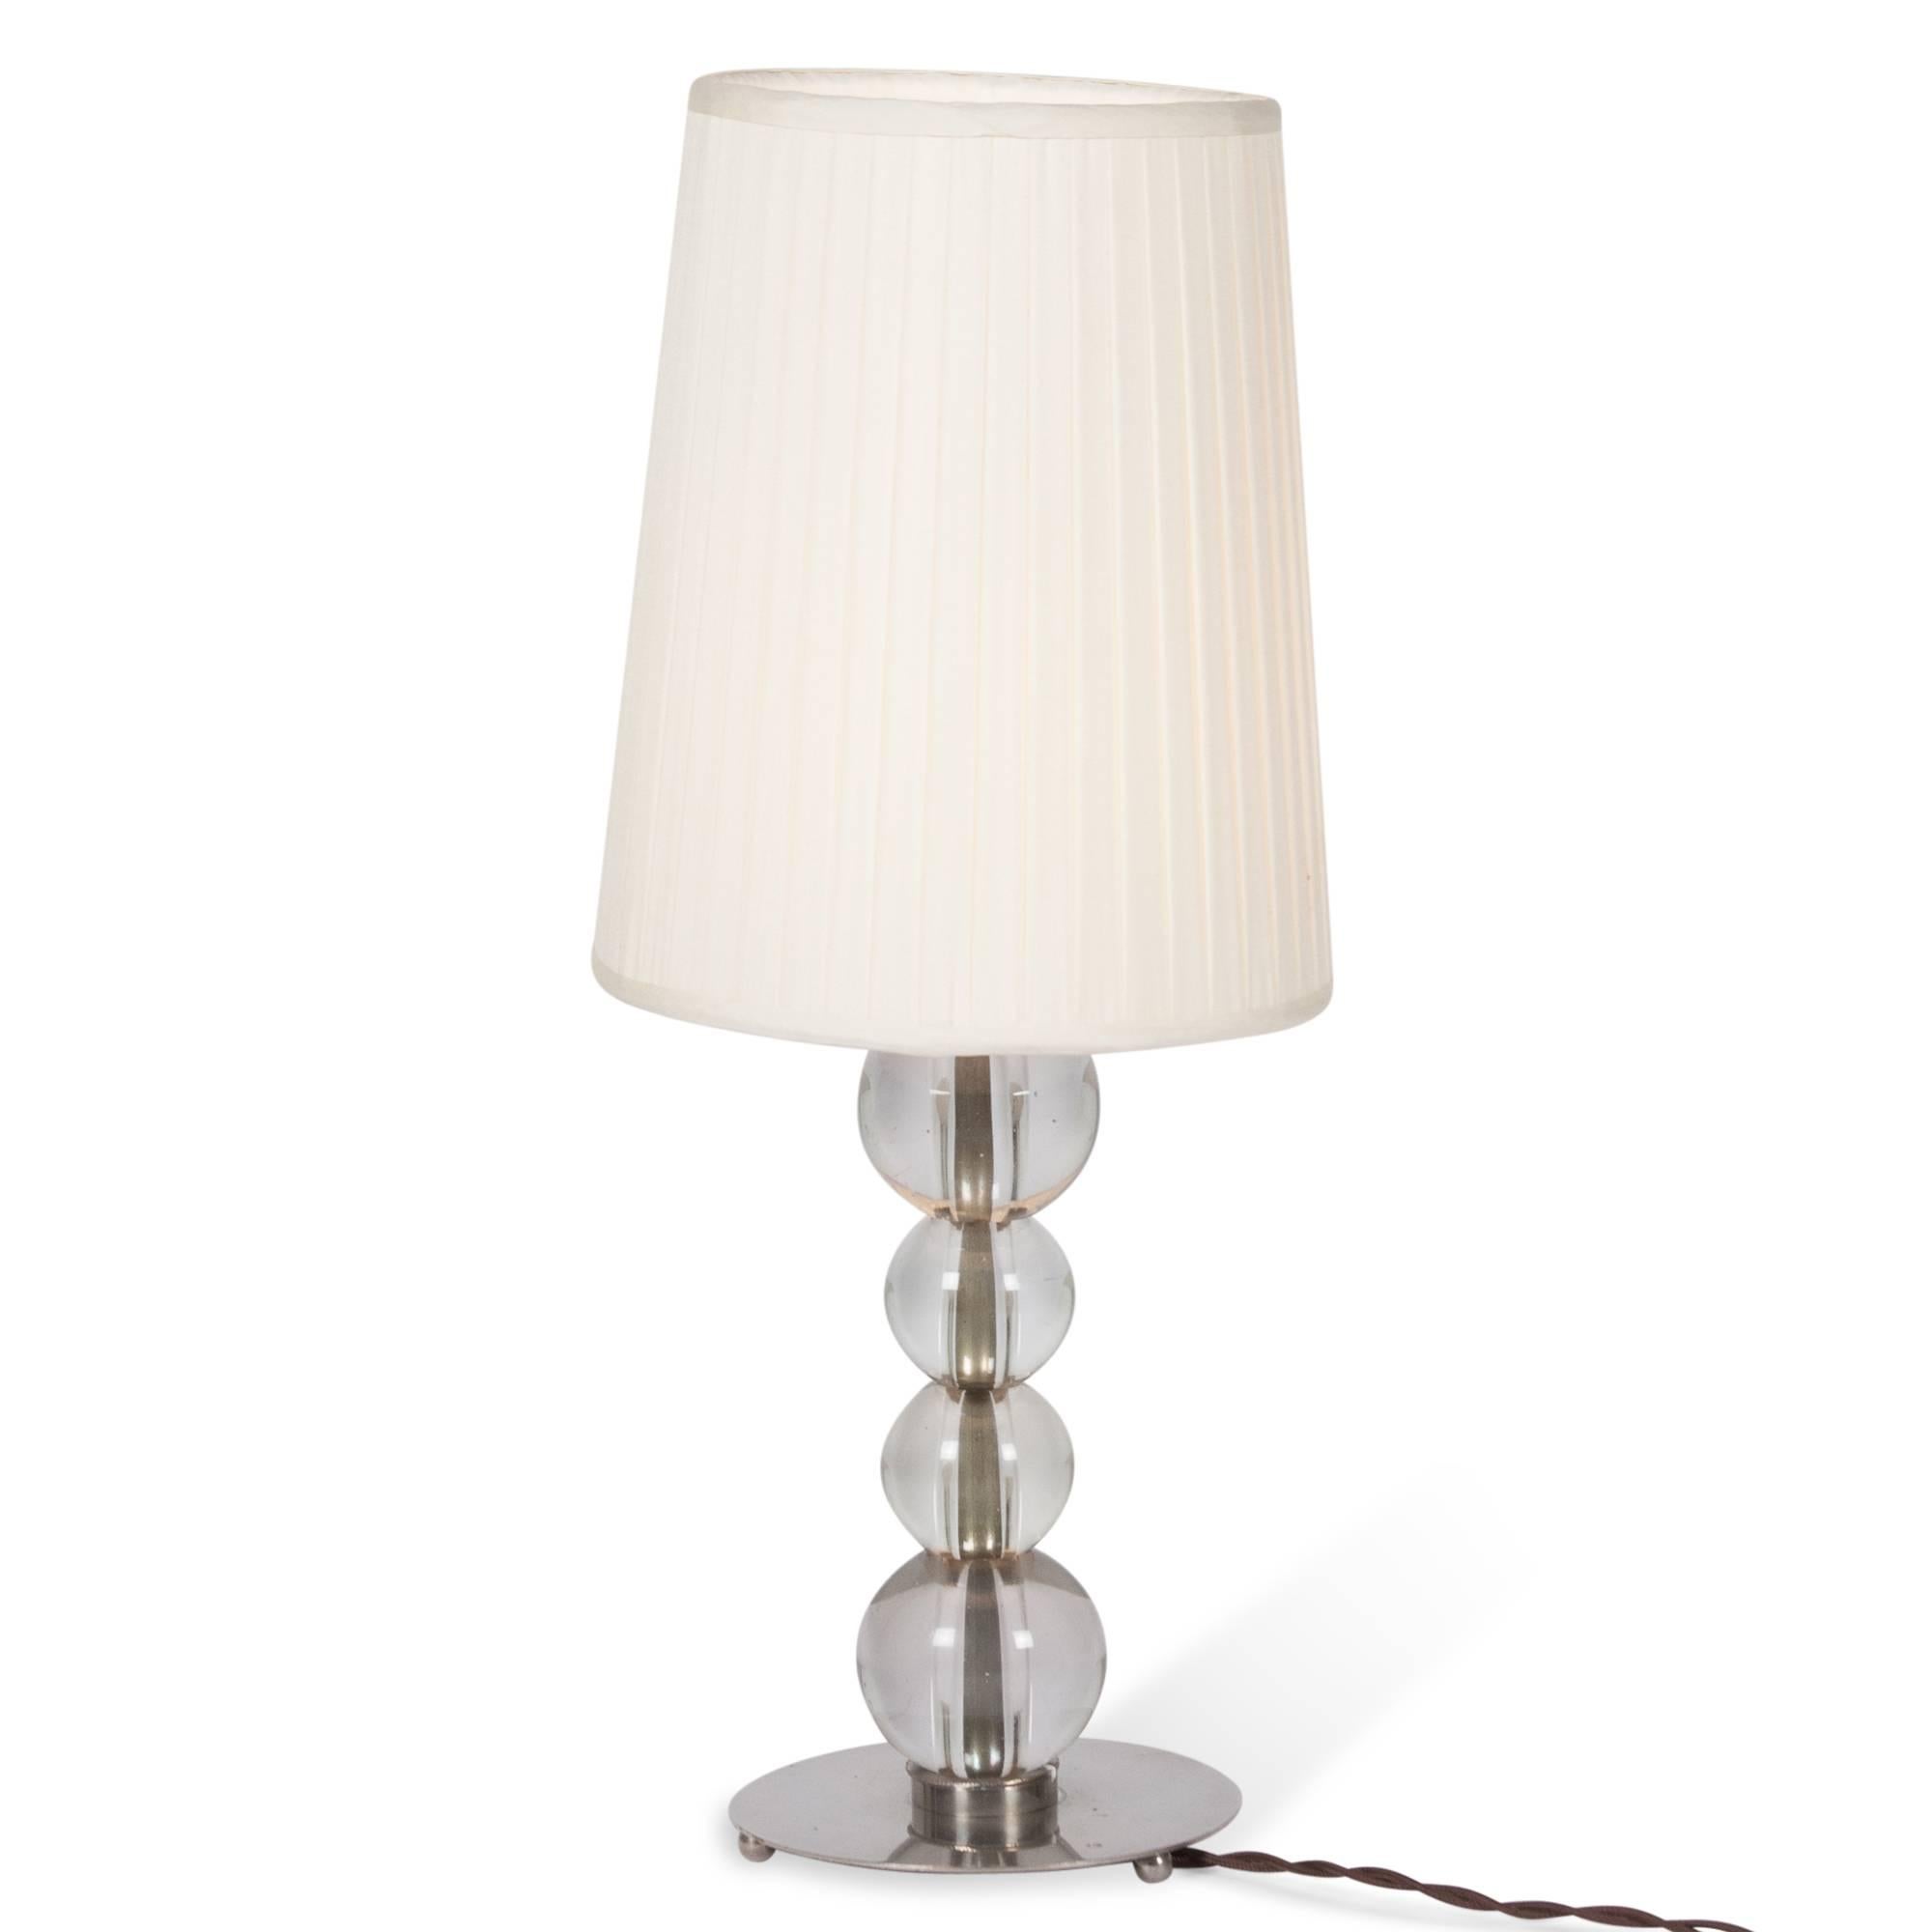 Stacked glass ball and nickel table lamp, with ball feet, attributed to Jacques Adnet, France, 1930s. Measures: 5” D base, 17” H, 7” D shade at widest. (Item #3542) 